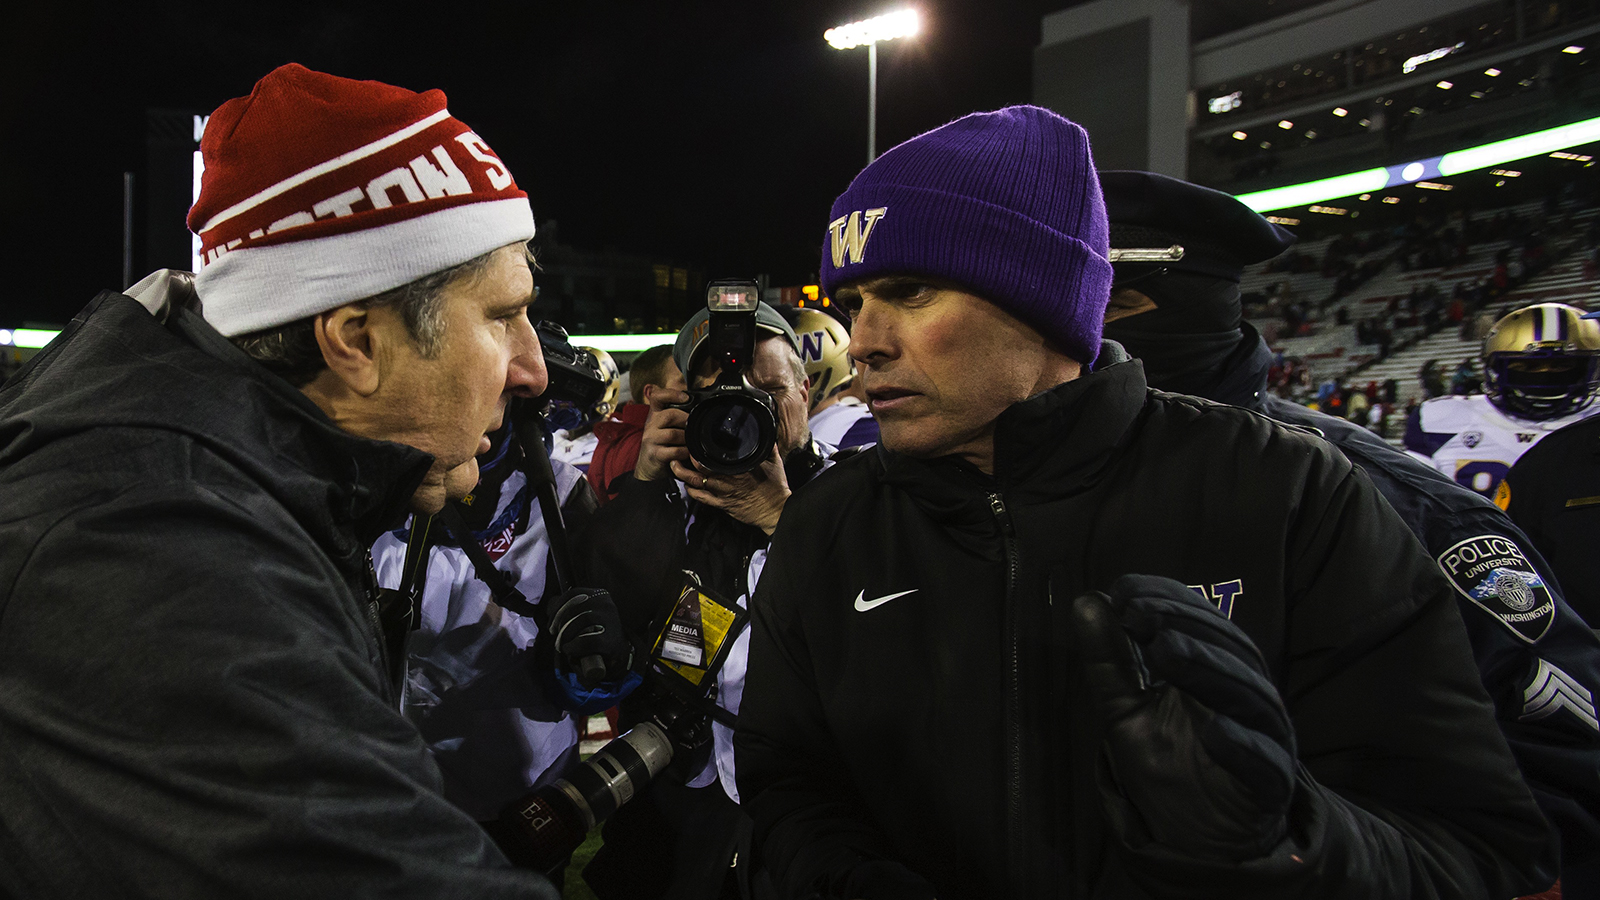 Top 10 Apple Cup games of all time